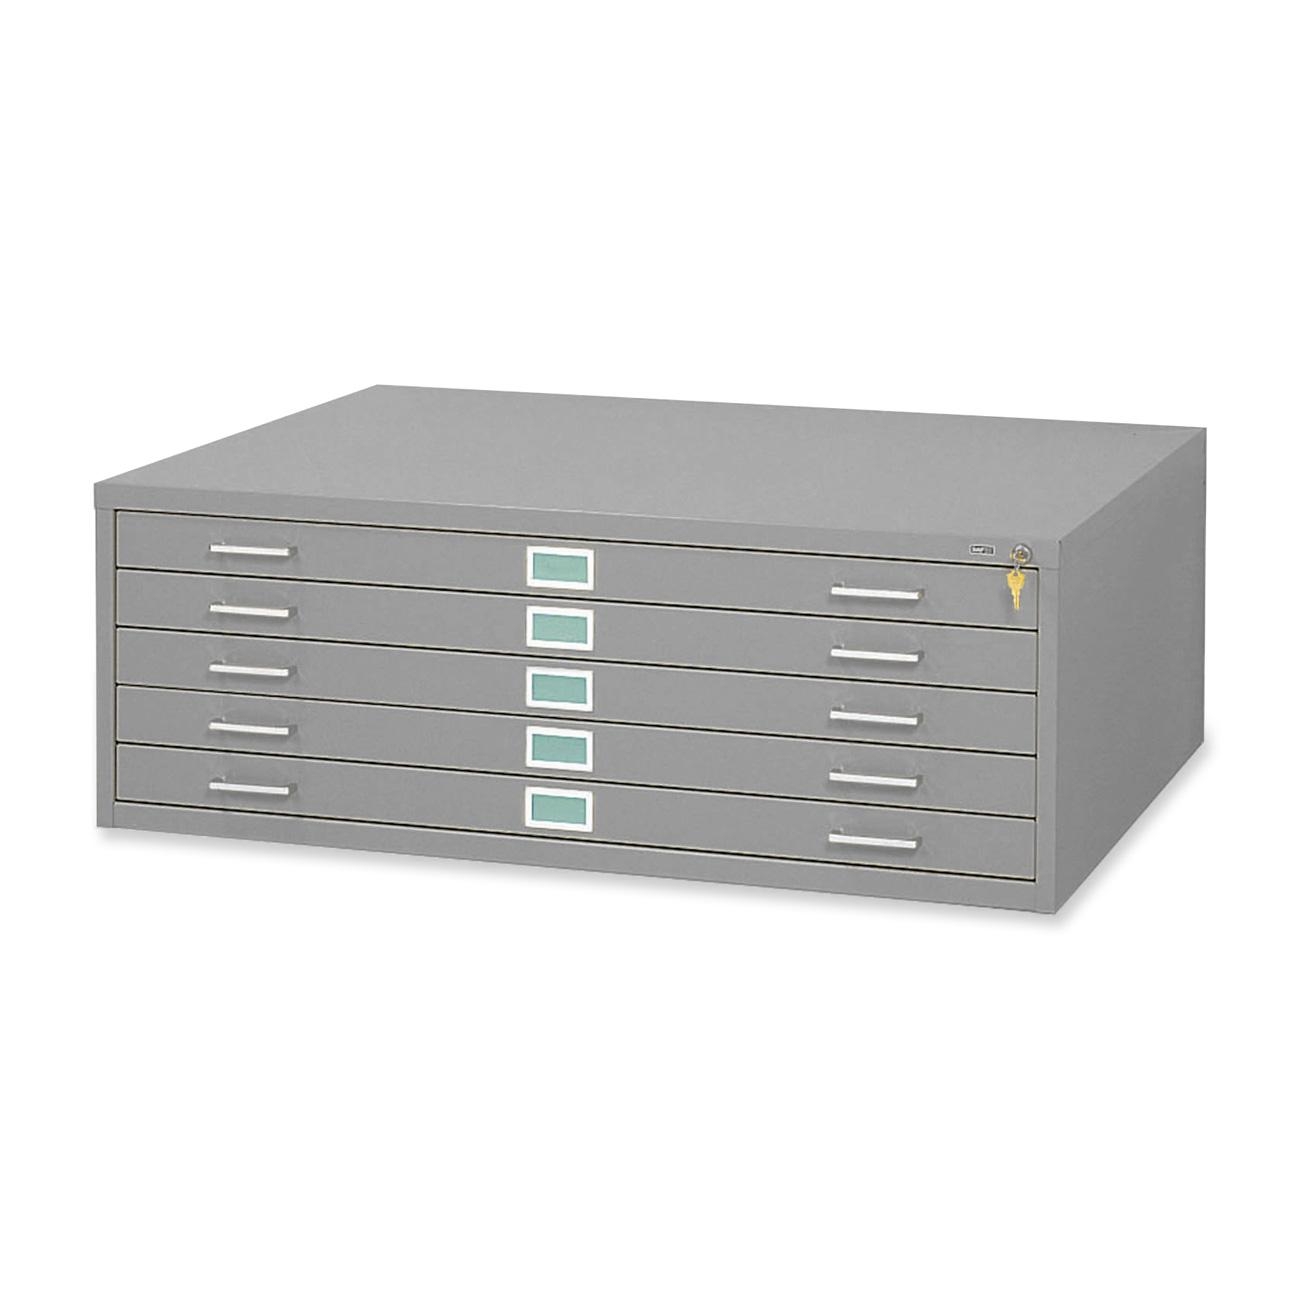 safco flat files